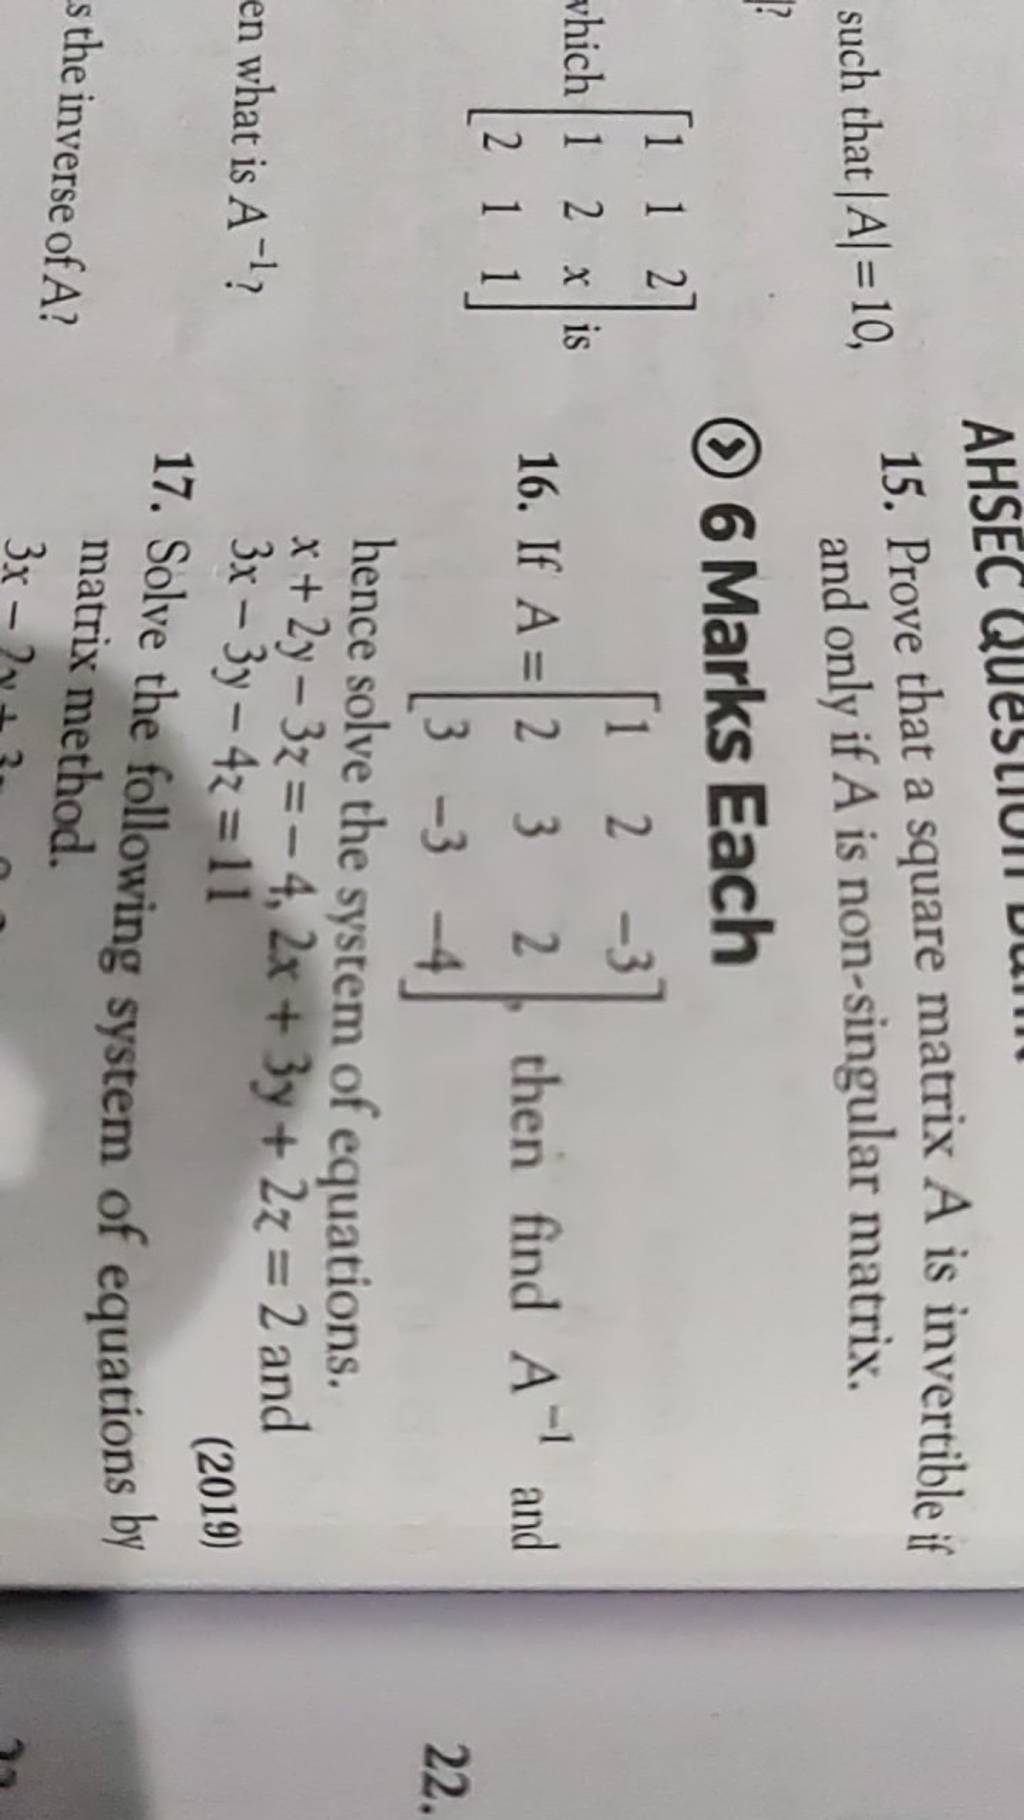 15. Prove that a square matrix A is invertible if and only if A is non